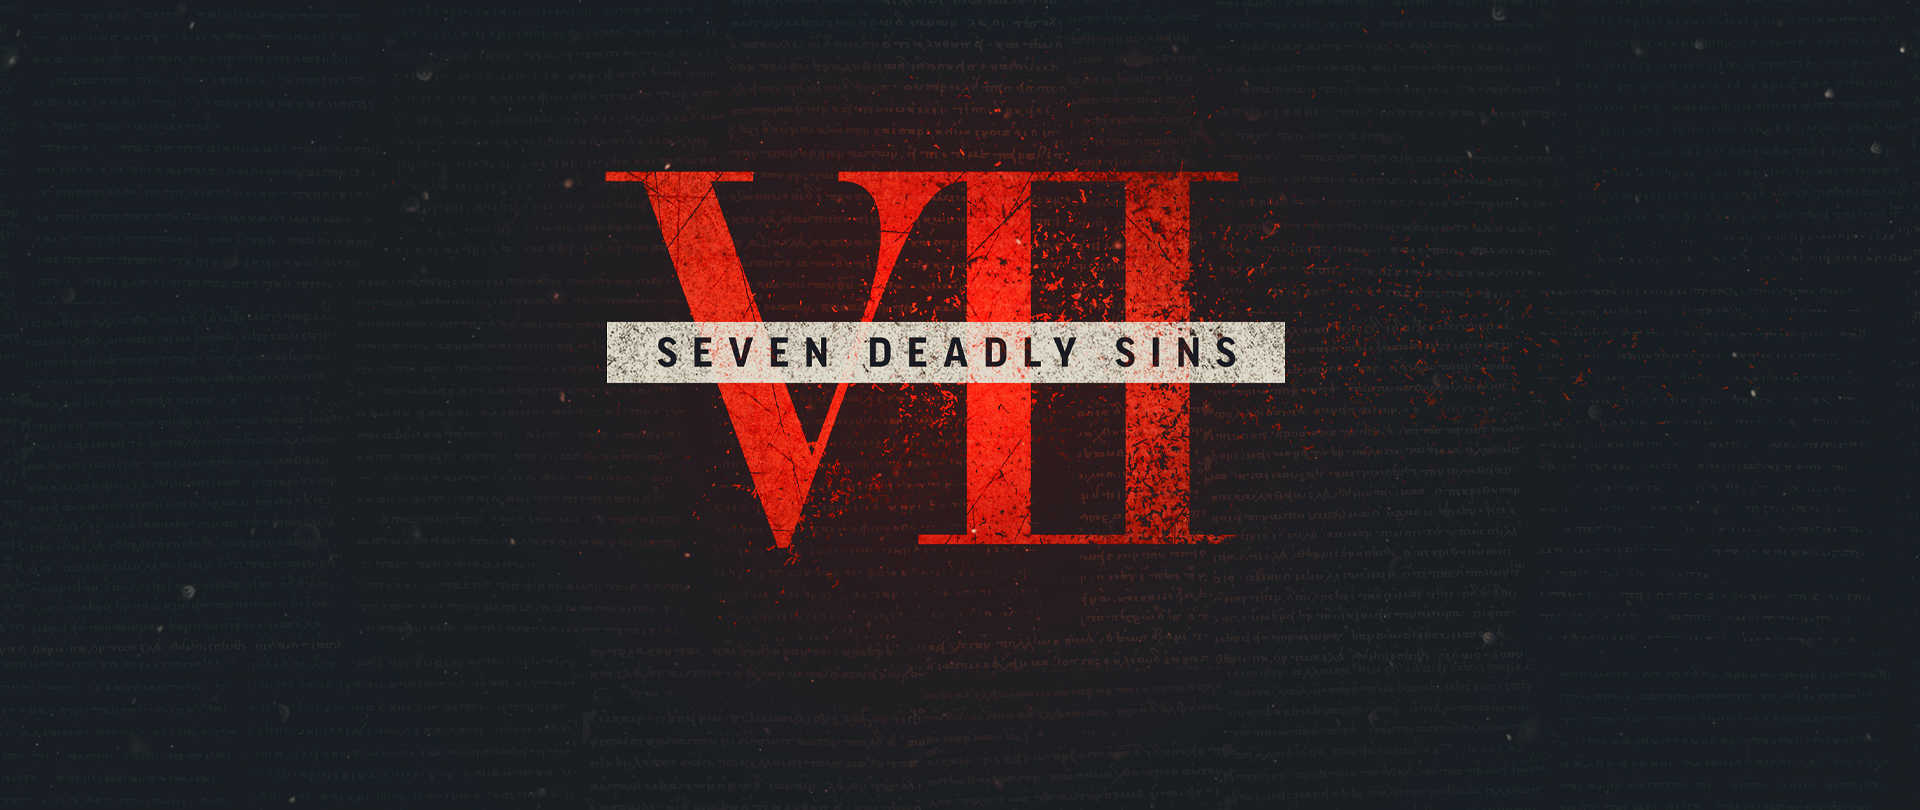 Seven Deadly Sins
Pastor Munro's booklet
Available in the Word Room
